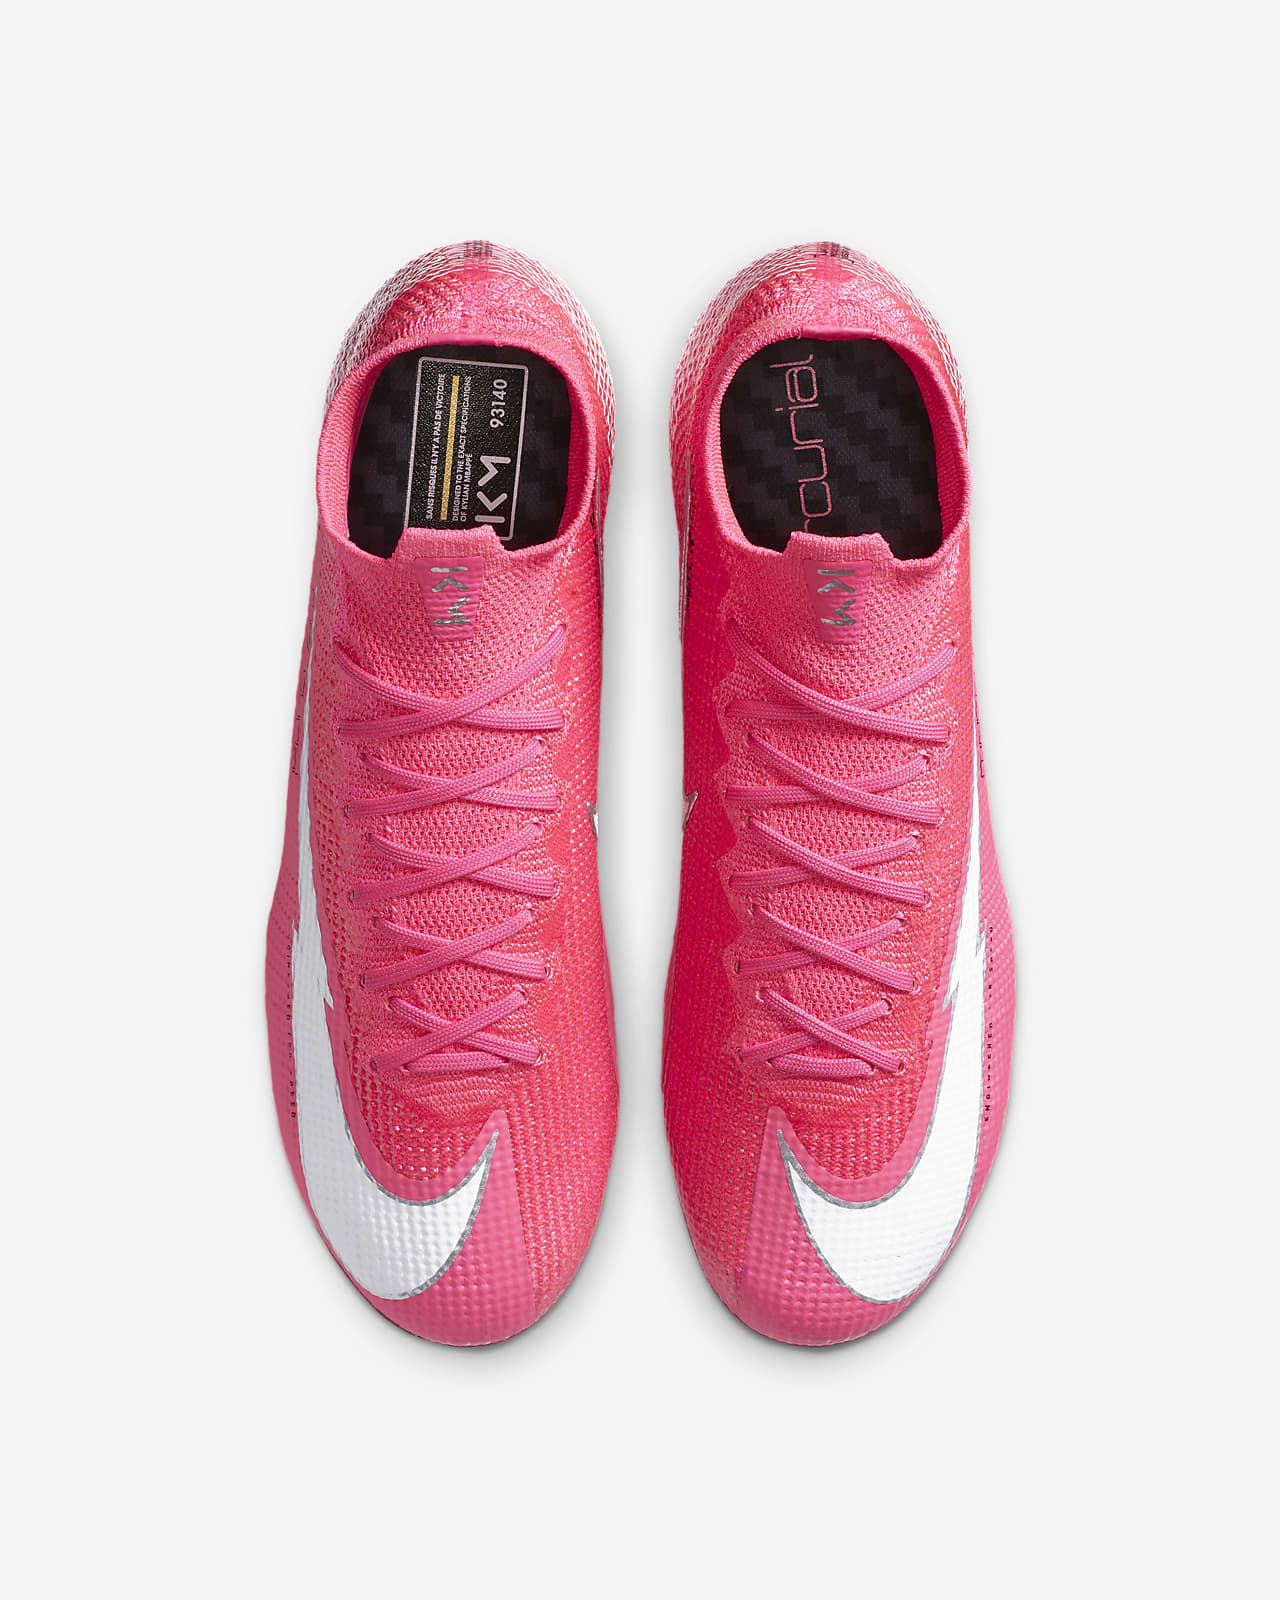 Nike Mercurial Superfly 7 Elite Mbappé Rosa FG Firm-Ground Football Boot.  Nike IN